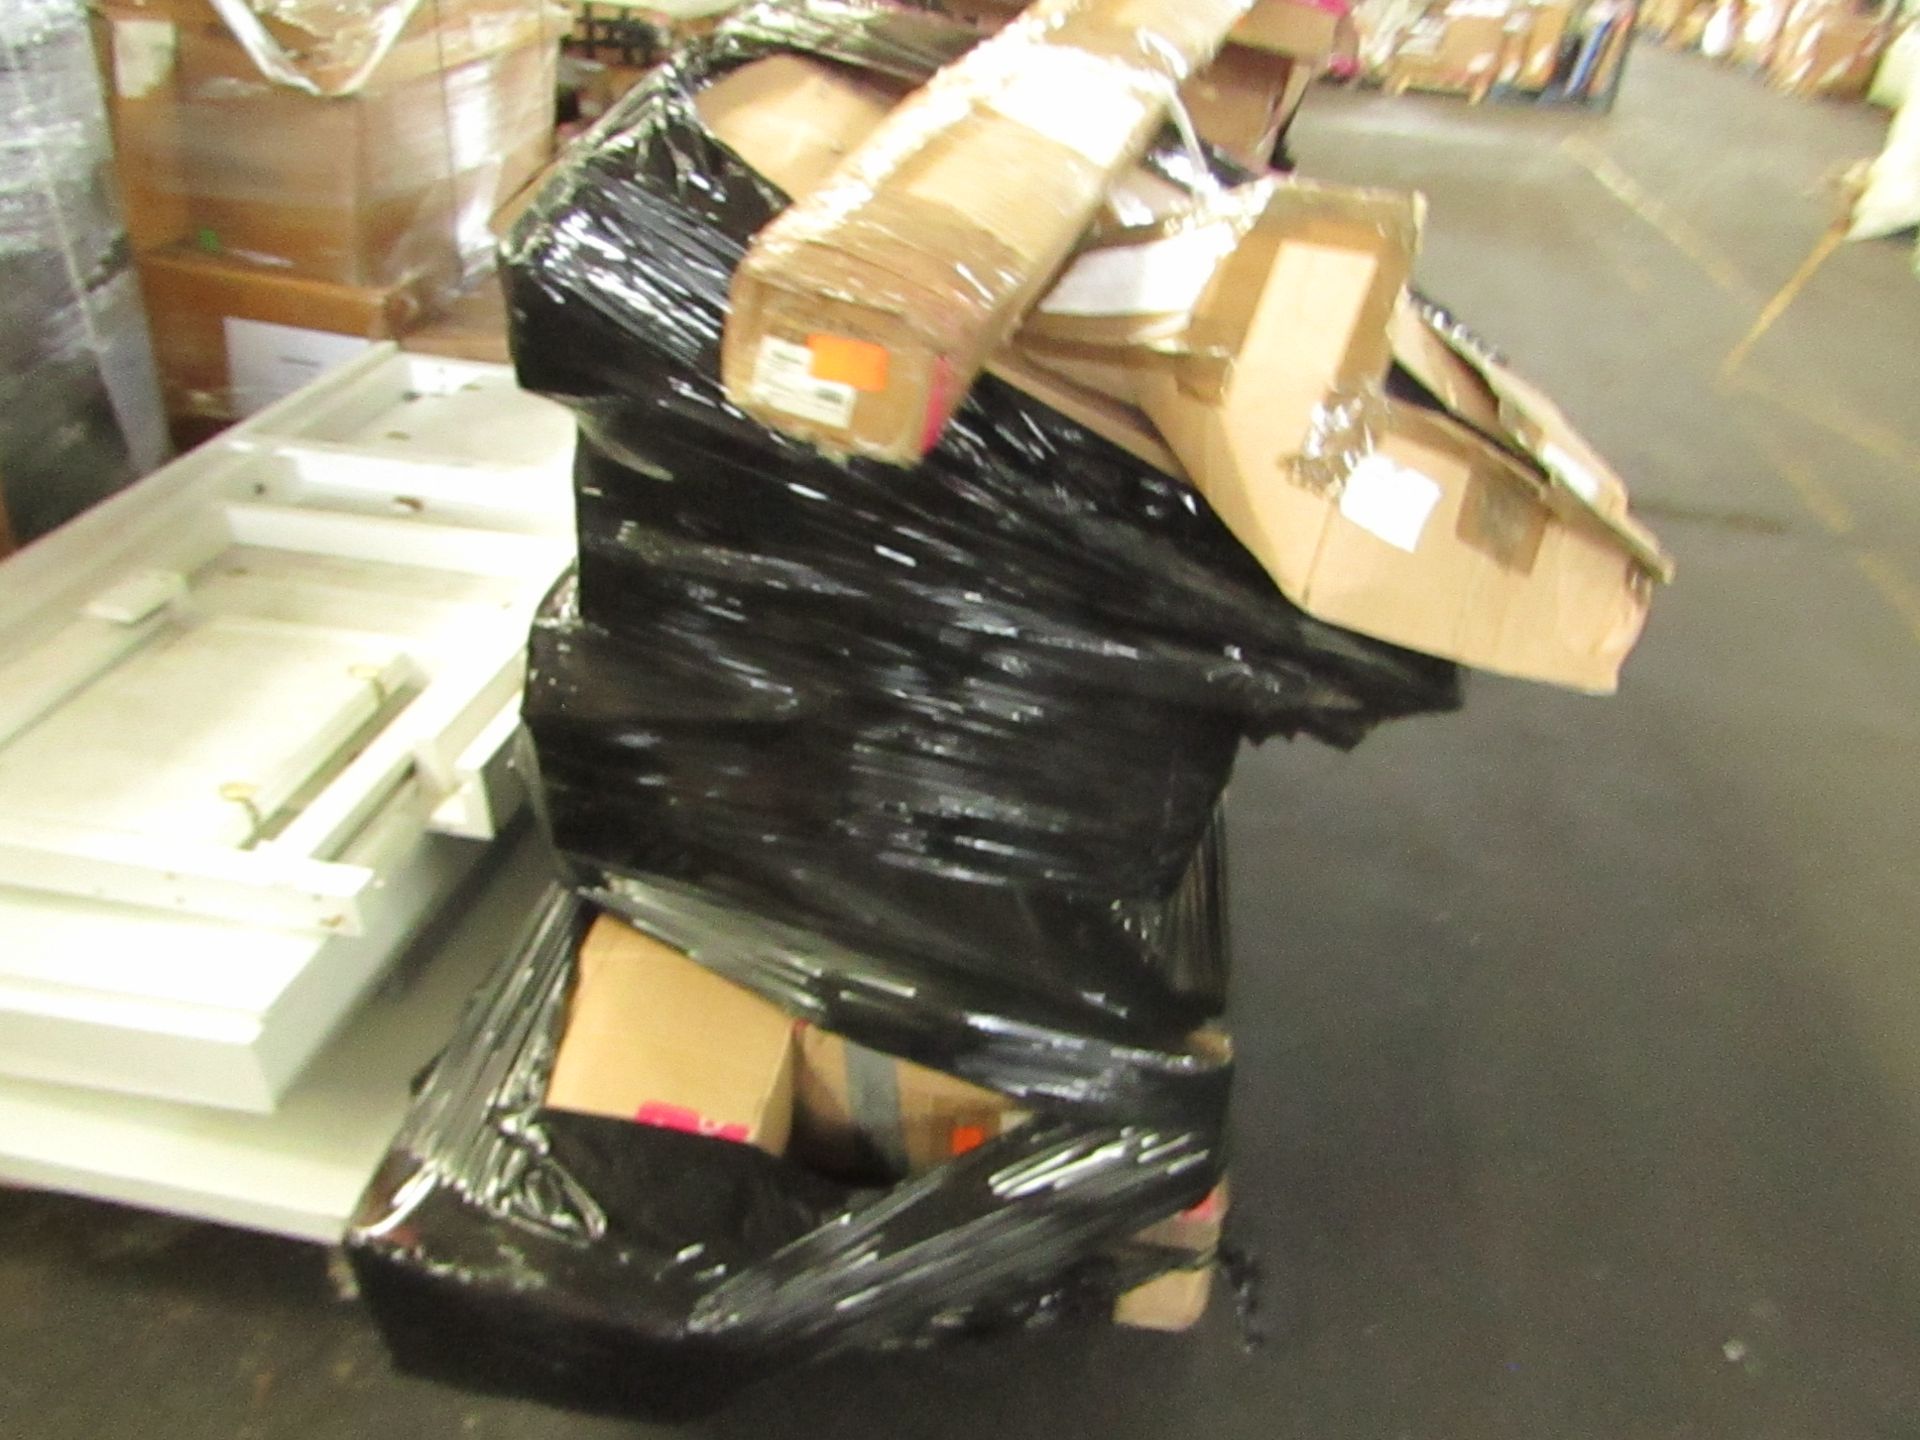 | 1X | PALLET OF FAULTY / MISSING PARTS / DAMAGED CUSTOMER RETURNS FROM TECTAKE UNMANIFESTED |